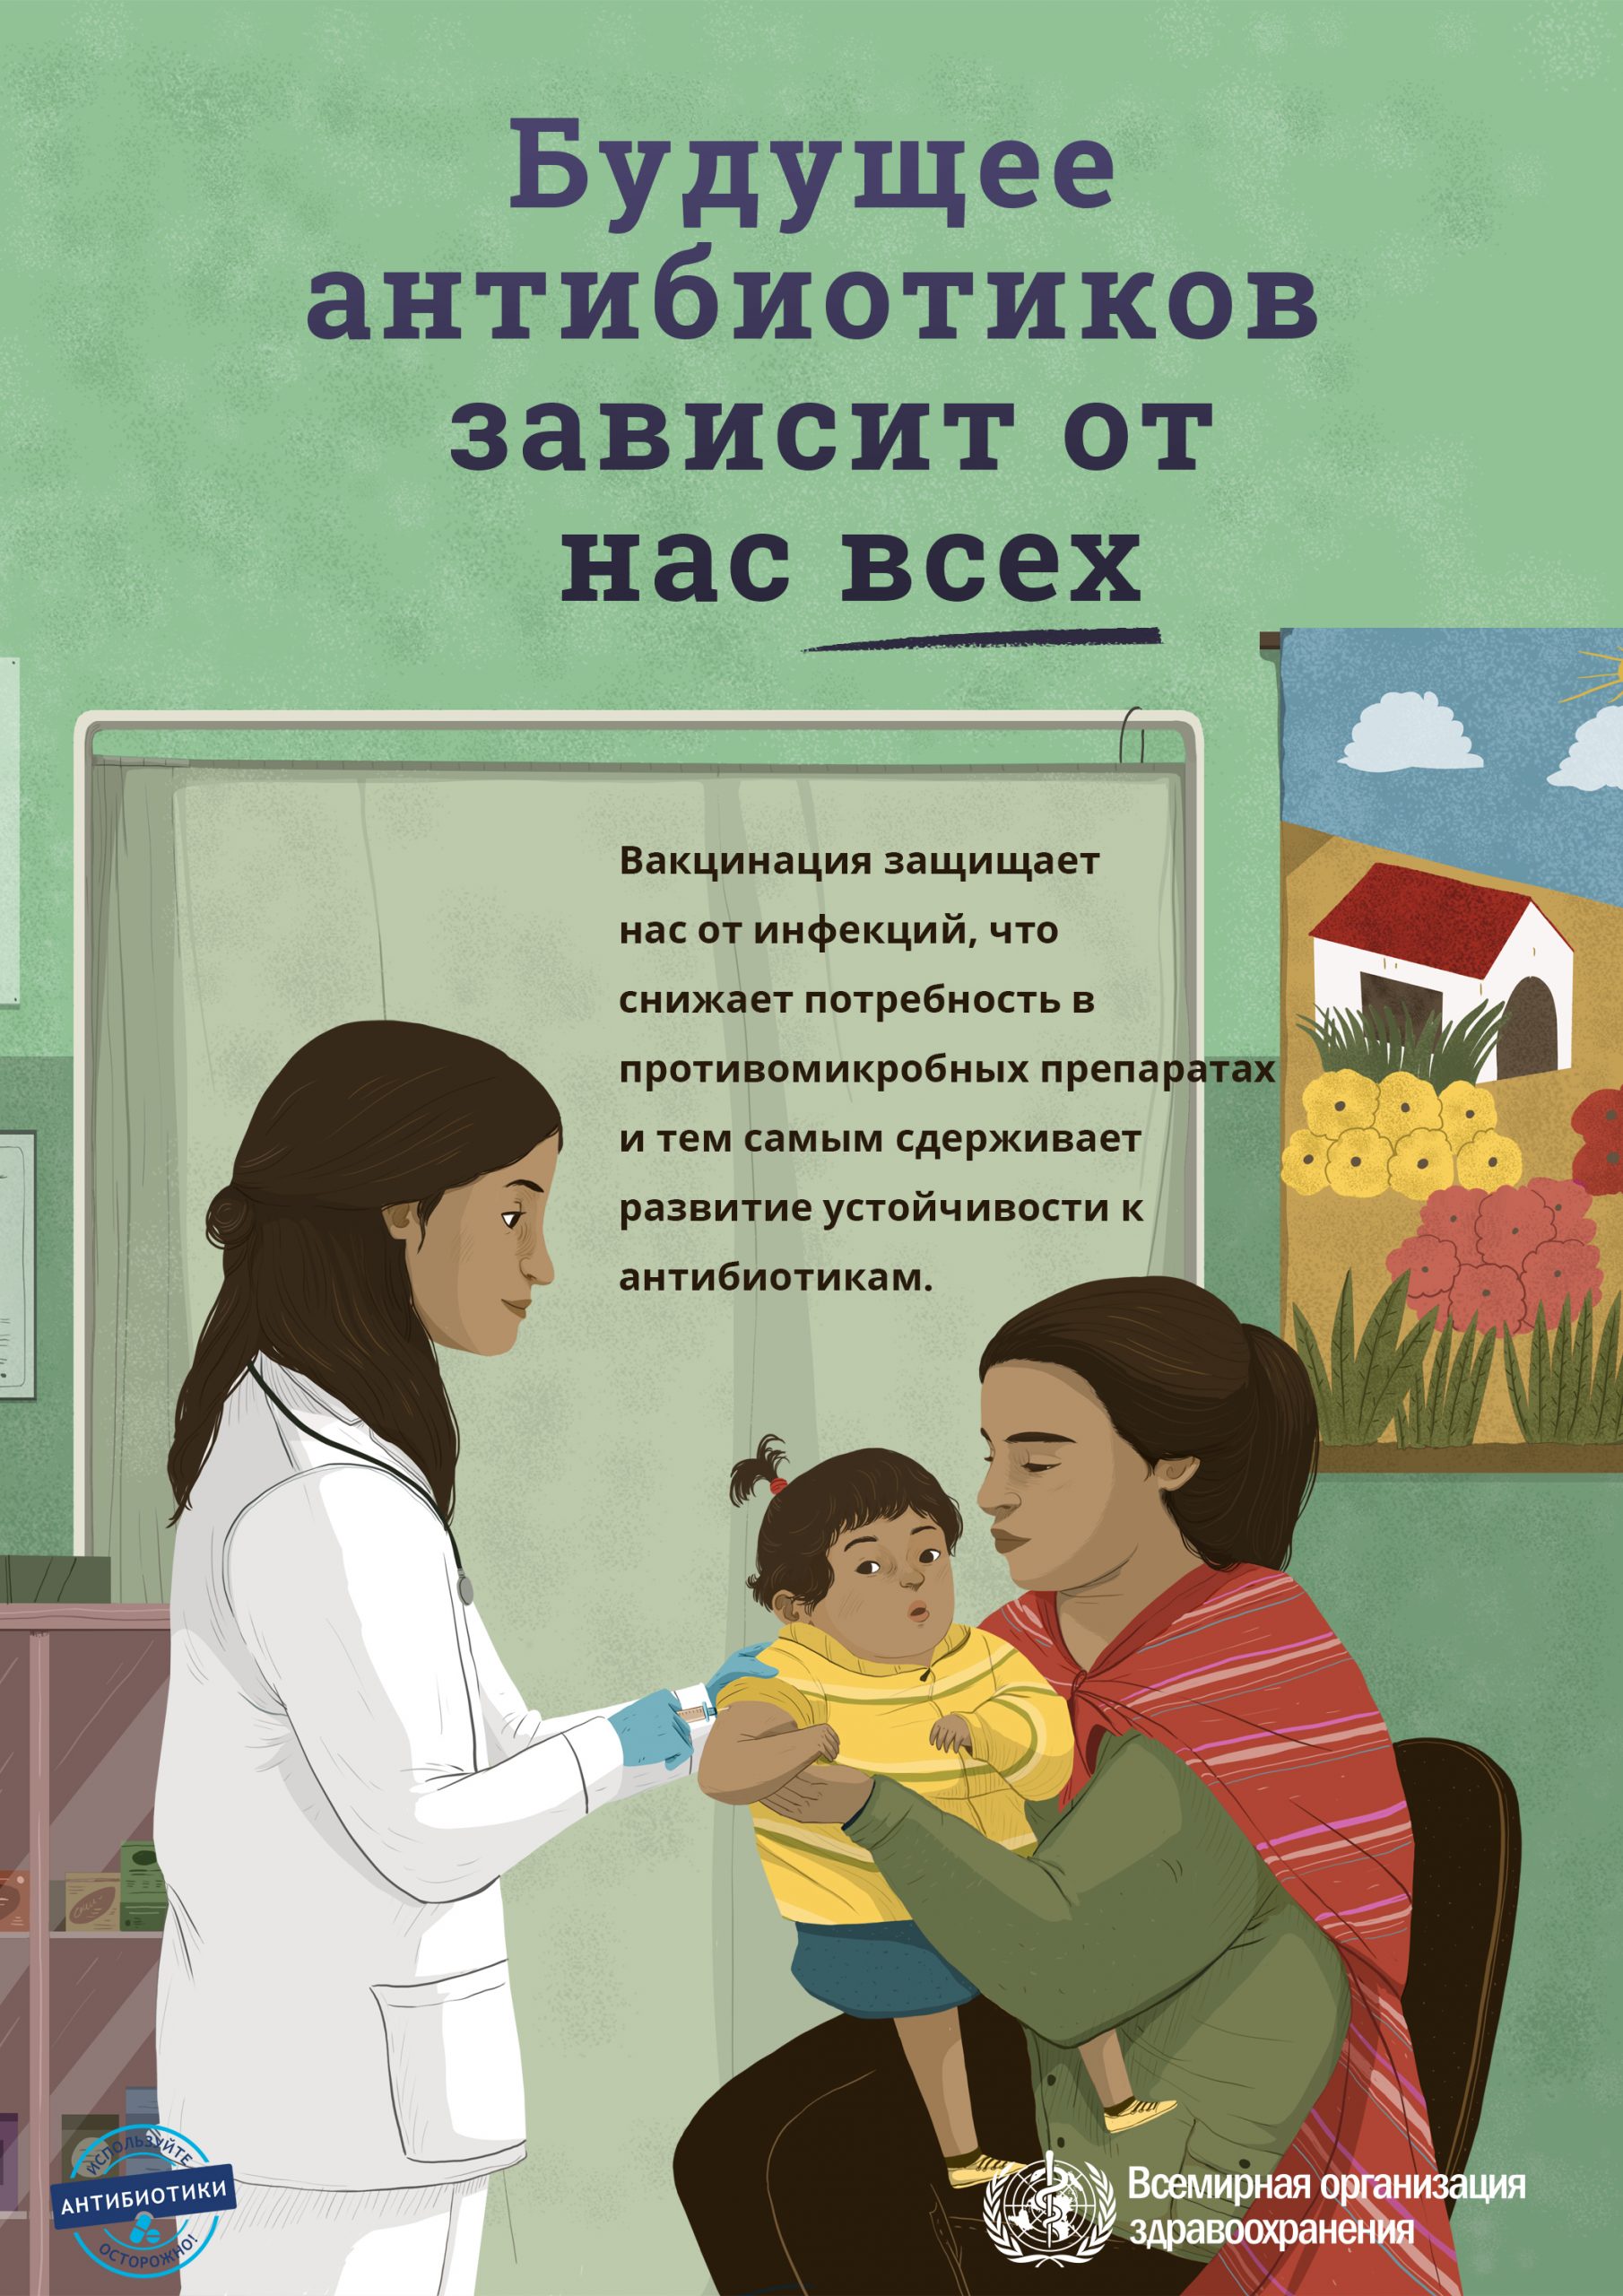 Poster 5_Vaccination_RU